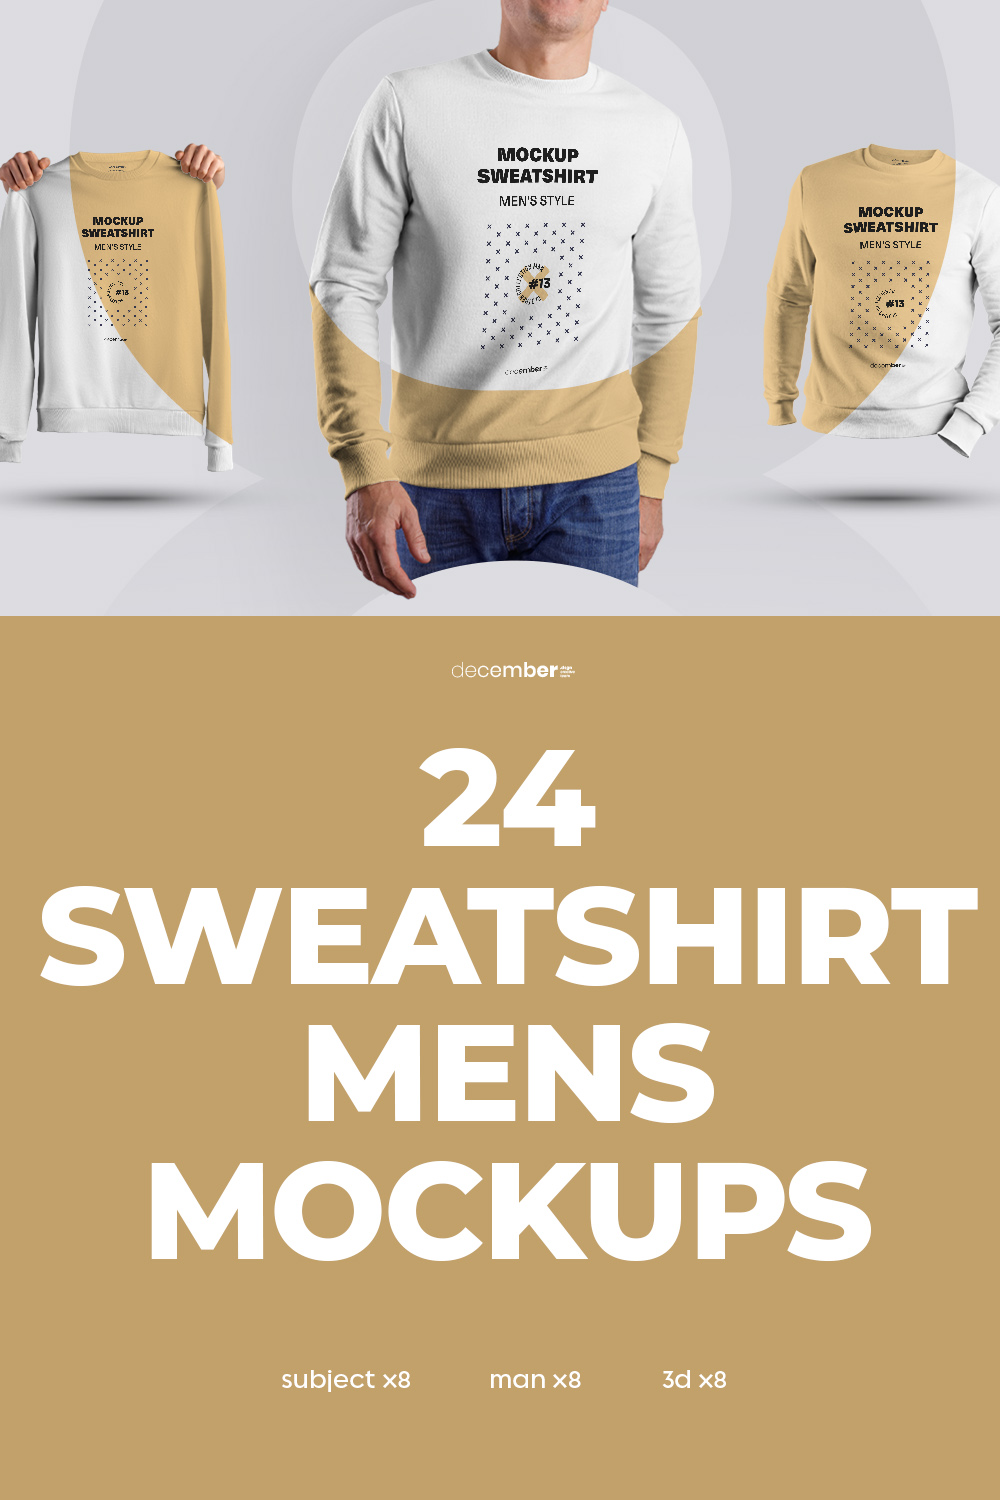 24 Mockup Men Sweatshirt On The Man 3D Style And Isolated Objects Pinterest Image.